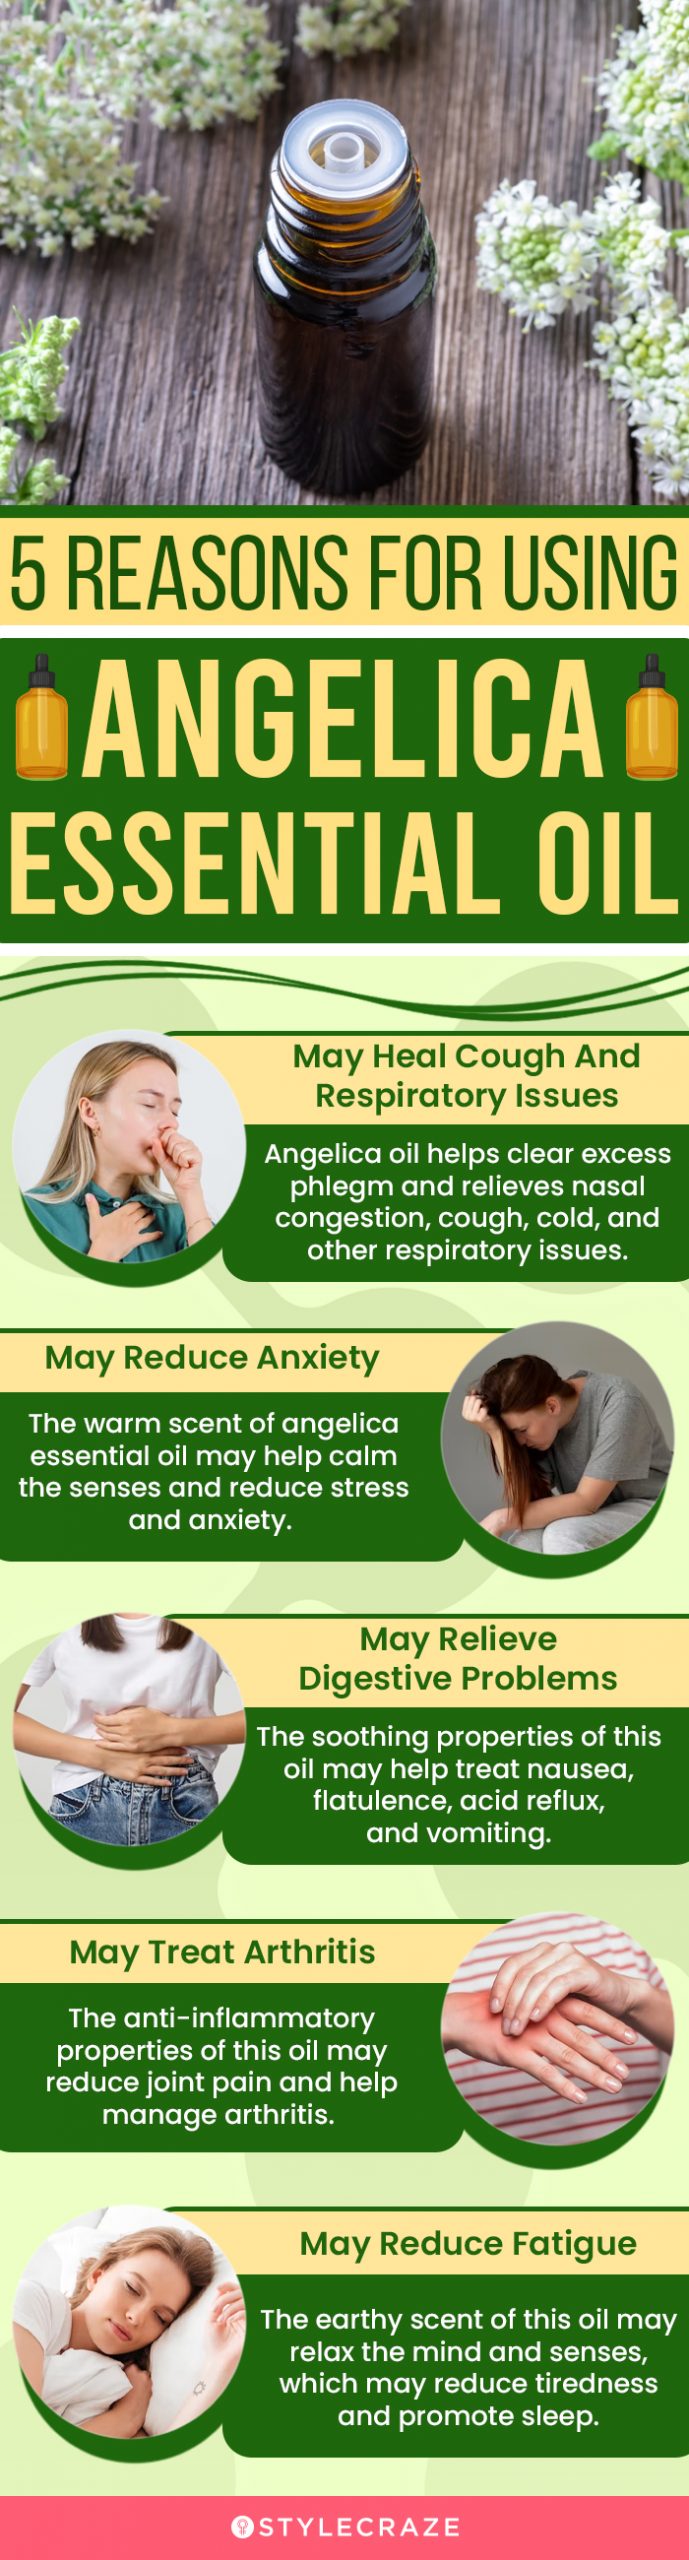 5 reasons for using angelica essential oil (infographic)